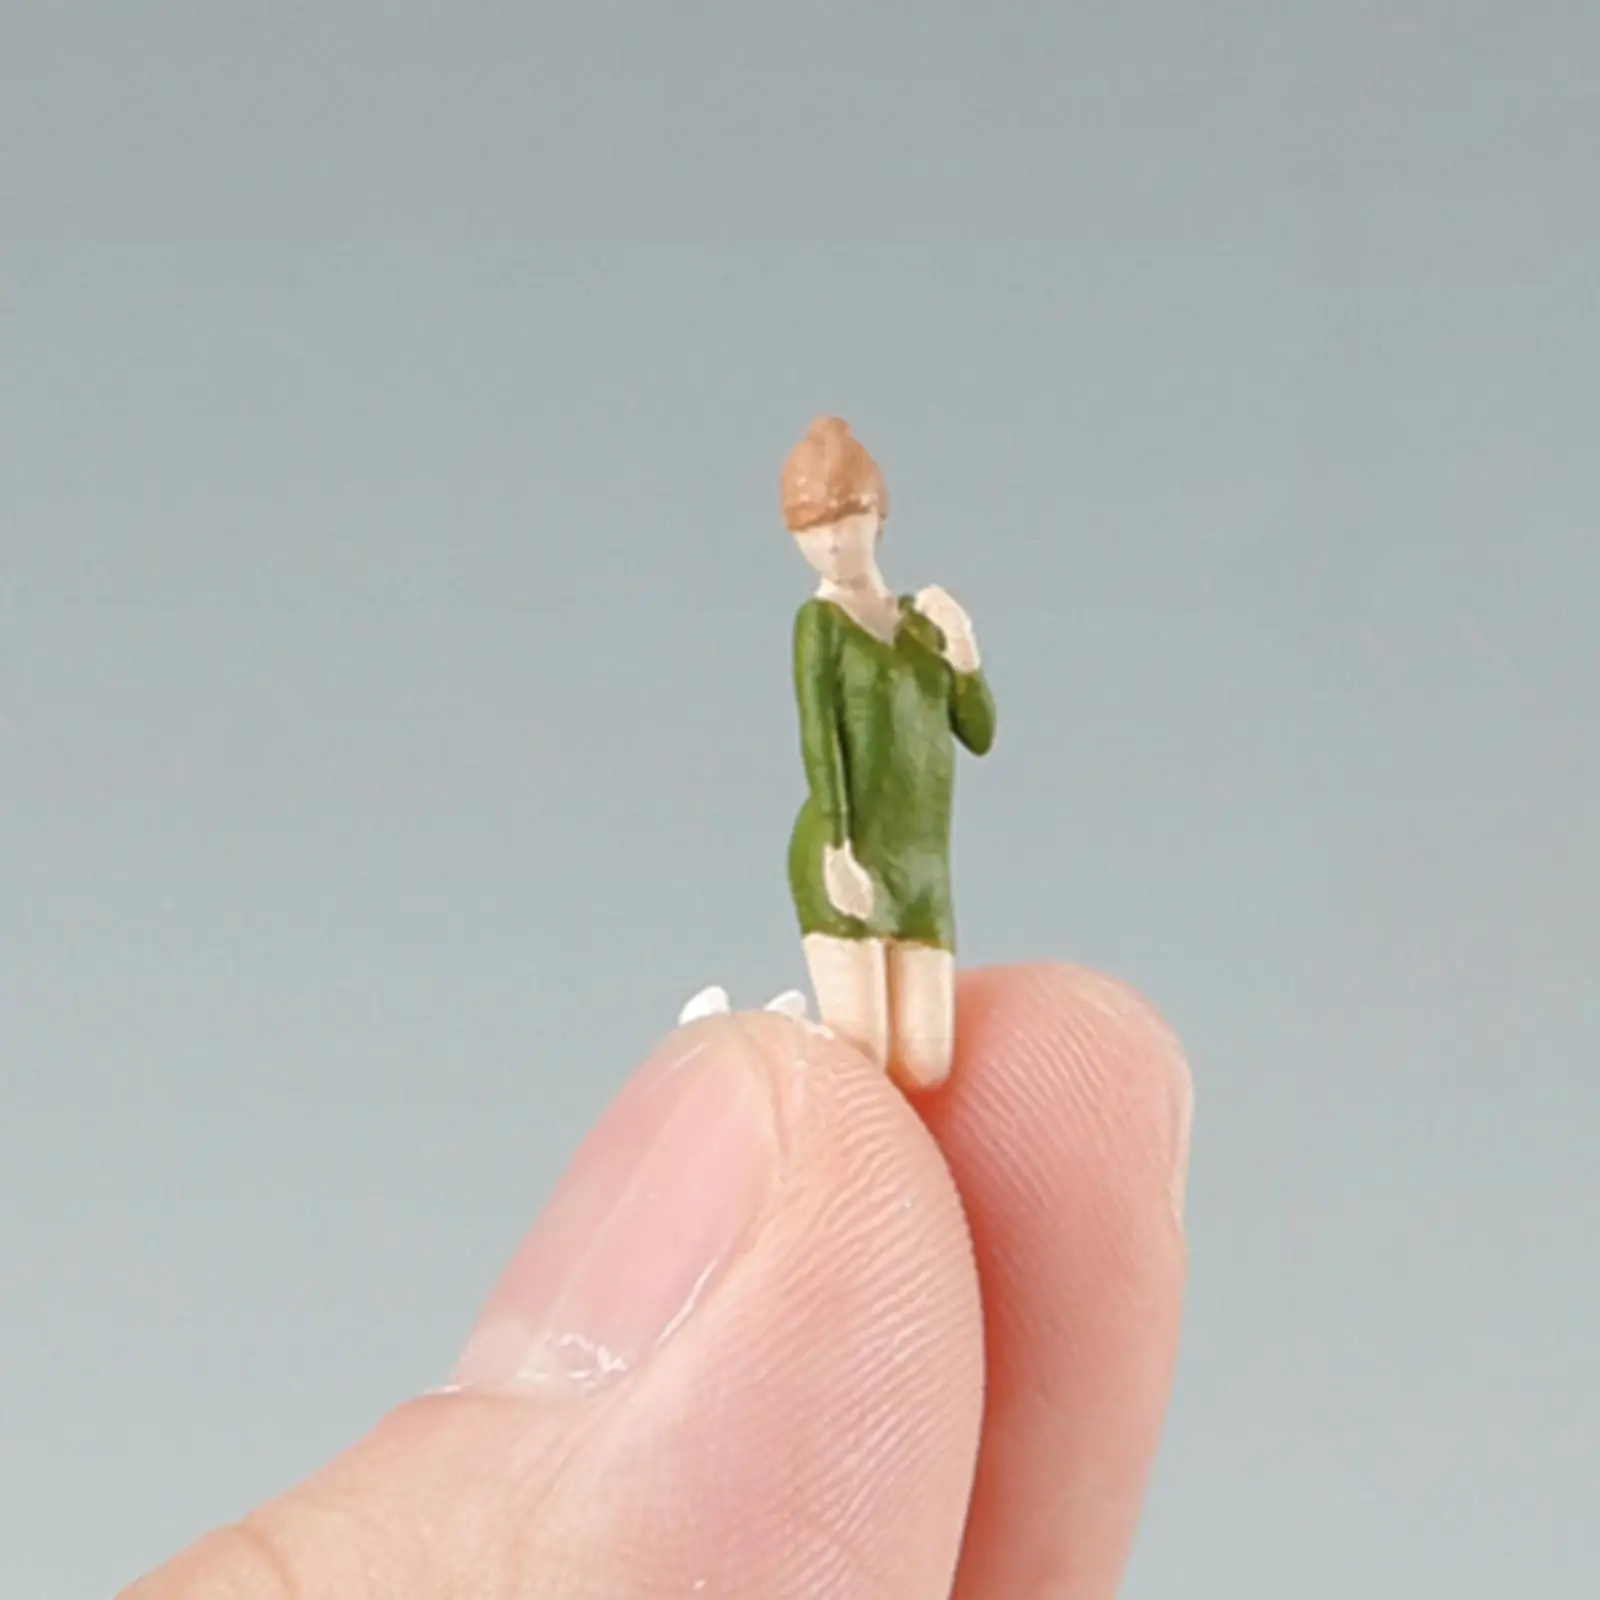 1/64 Scale People Figures Resin Miniature People Figurines for Diorama Dollhouse Micro Landscapes Photography Props Accessories